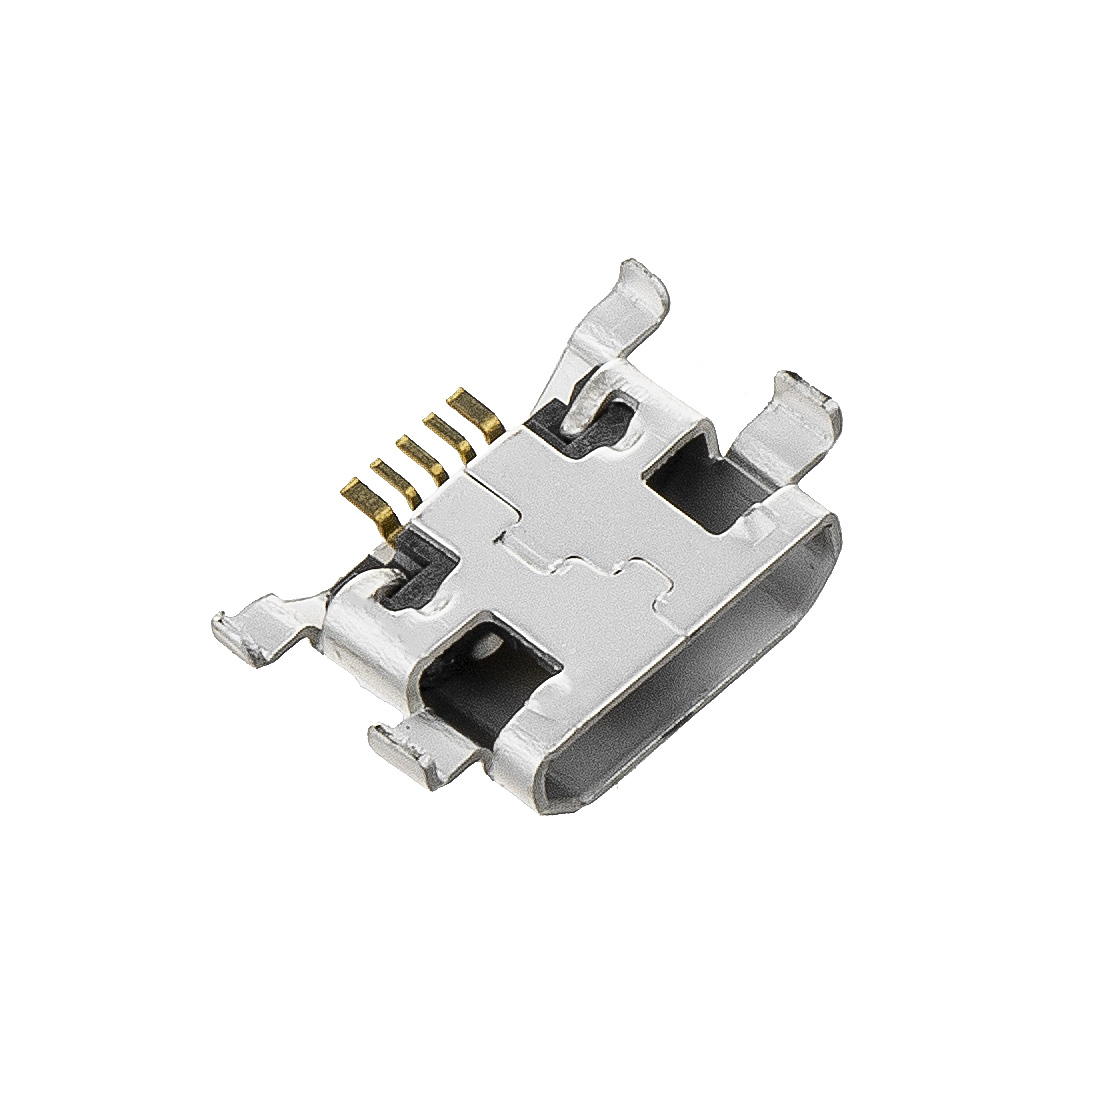 conector-incarcare---date-huawei-p8-lite--282017-29-